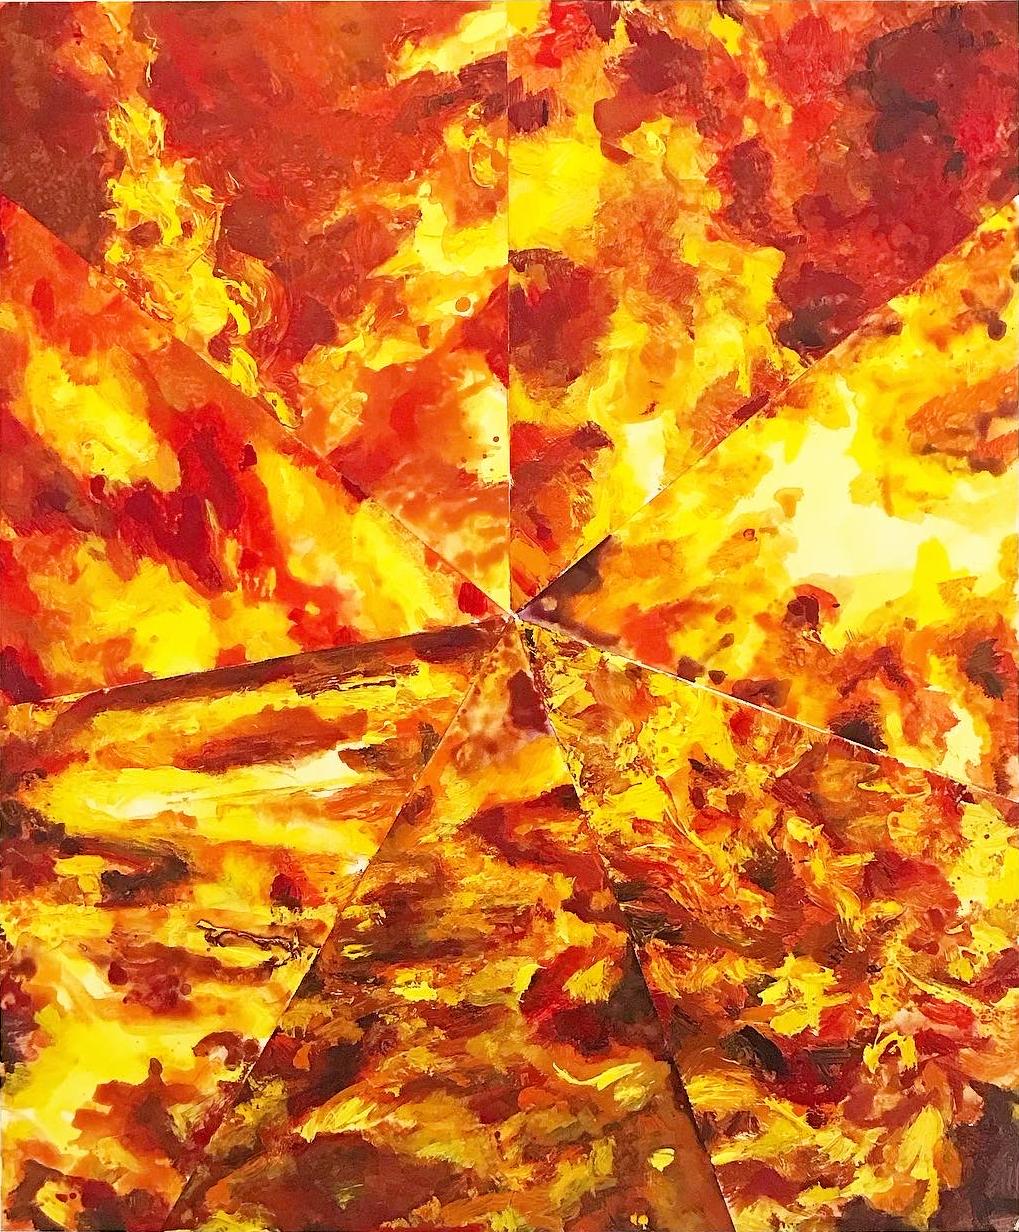 Seven Fires: geometric abstract painting of fire in yellow, red & orange